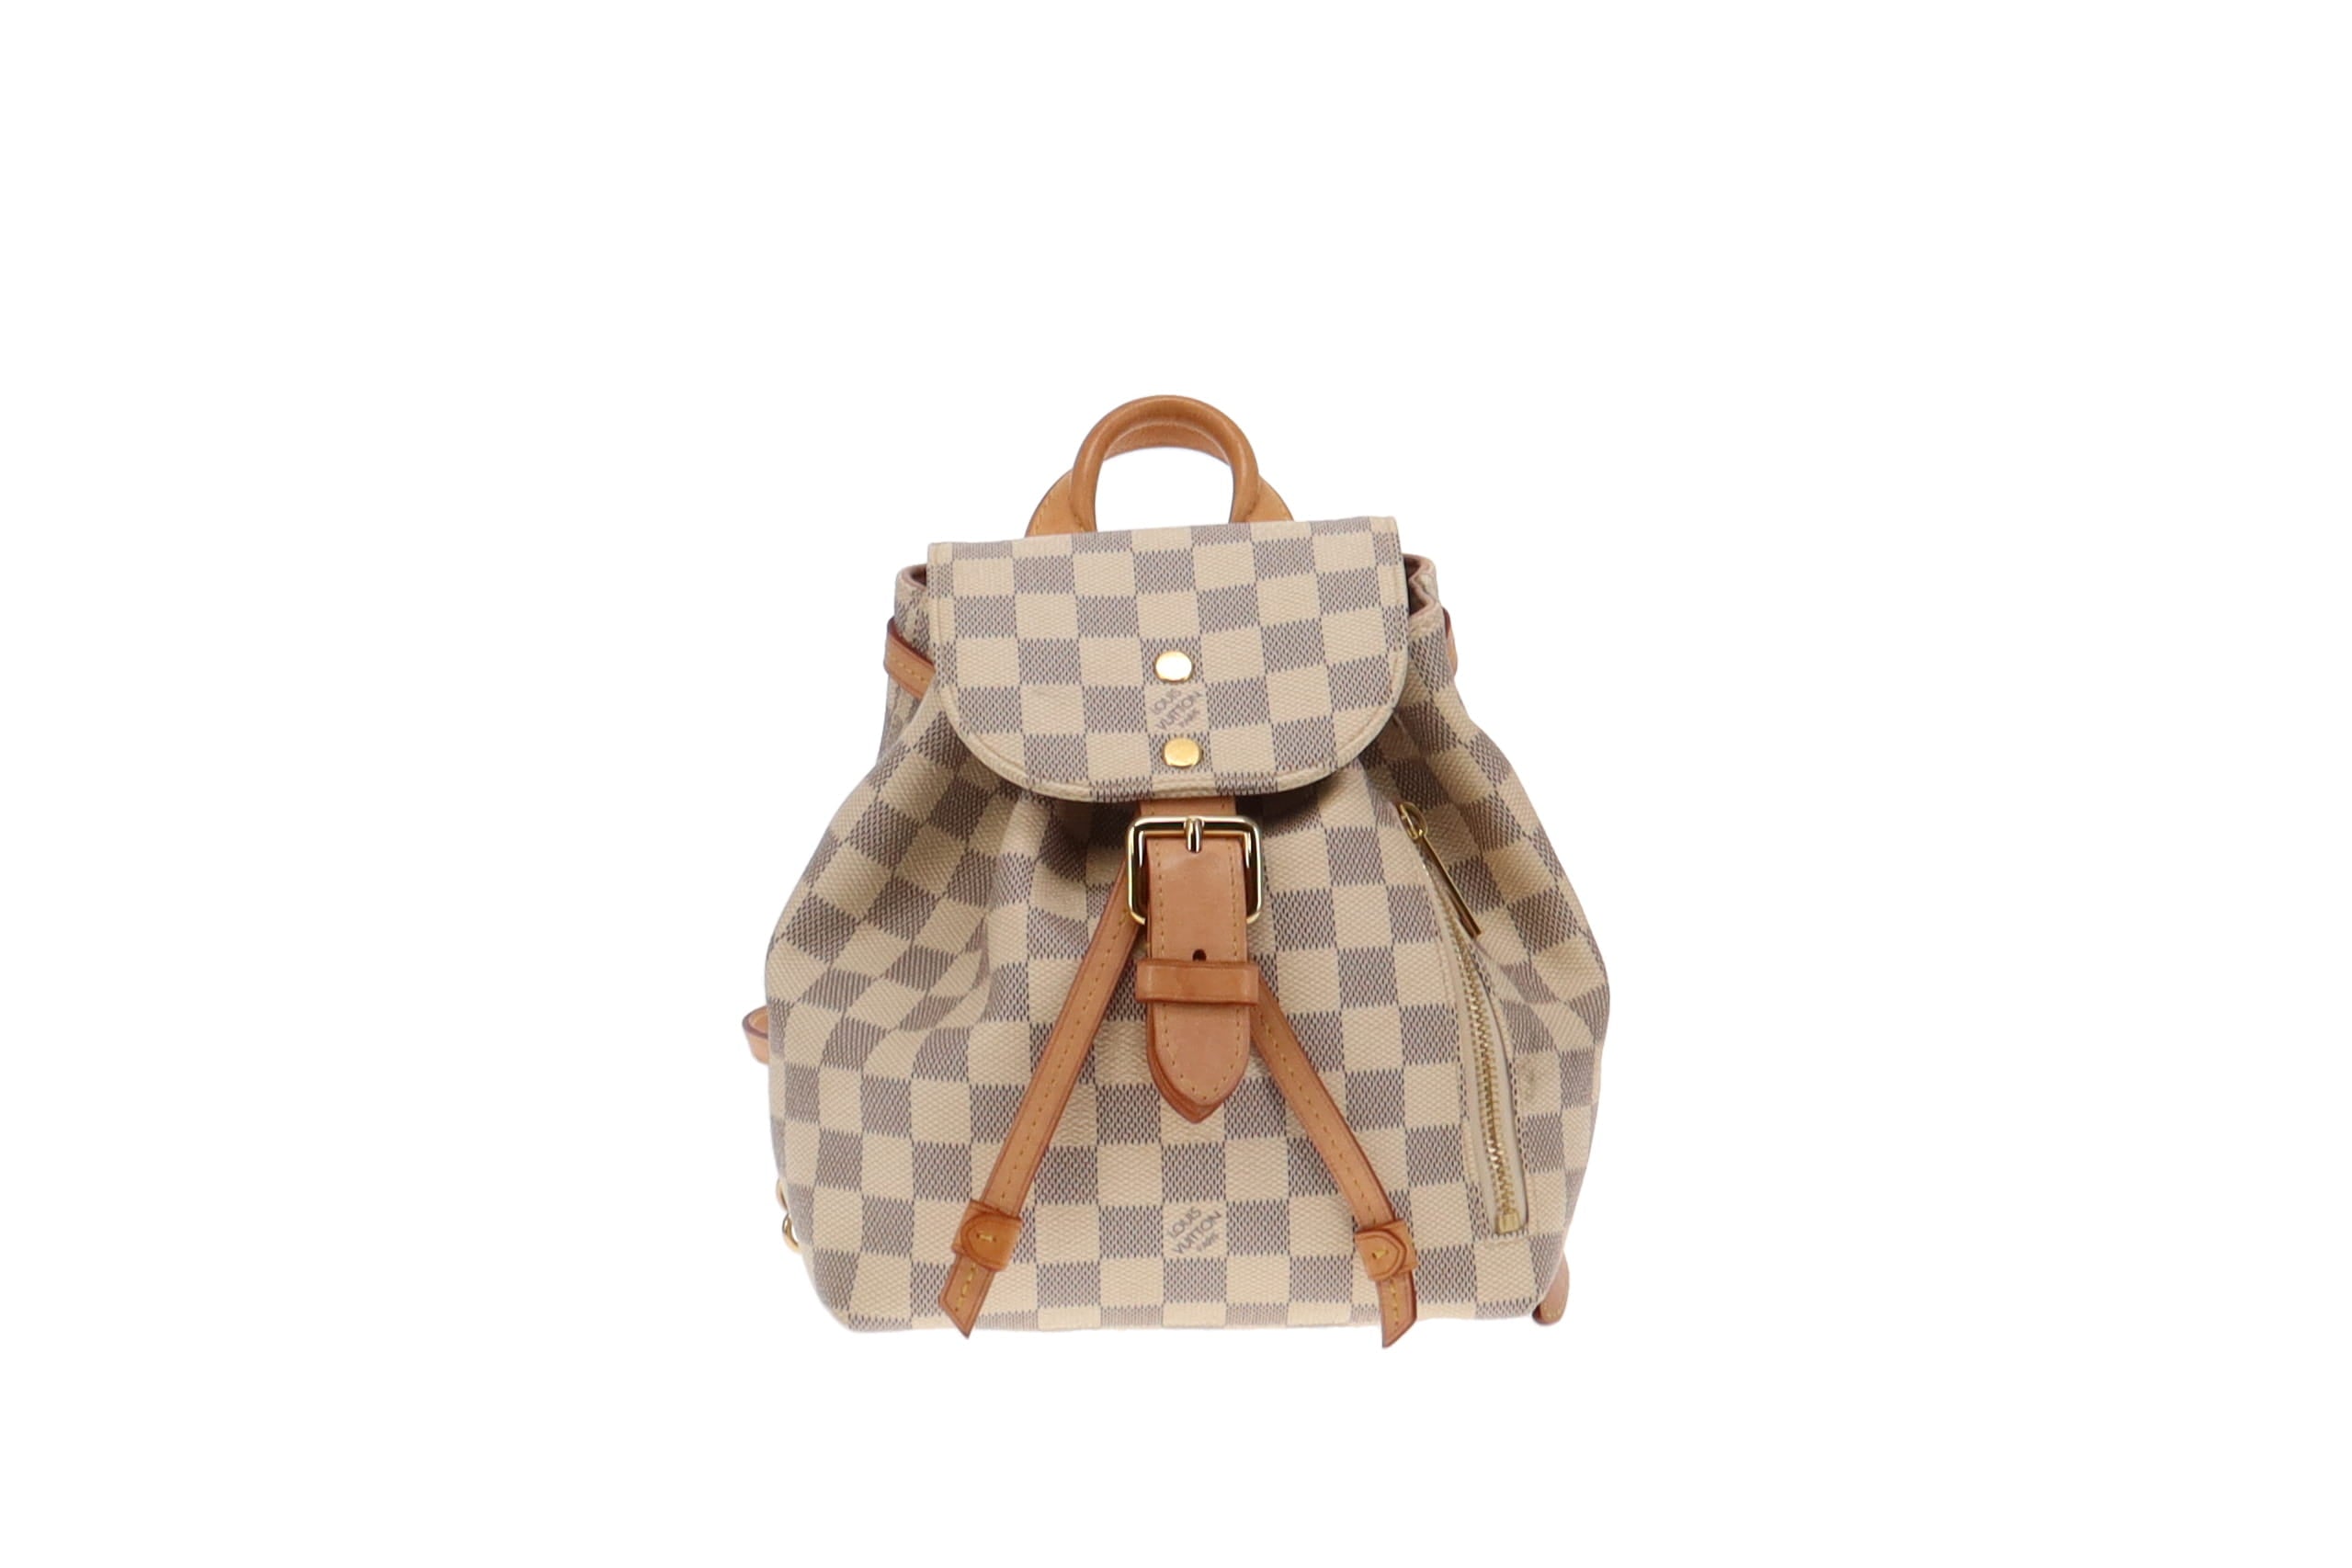 Sperone leather backpack Louis Vuitton Multicolour in Leather